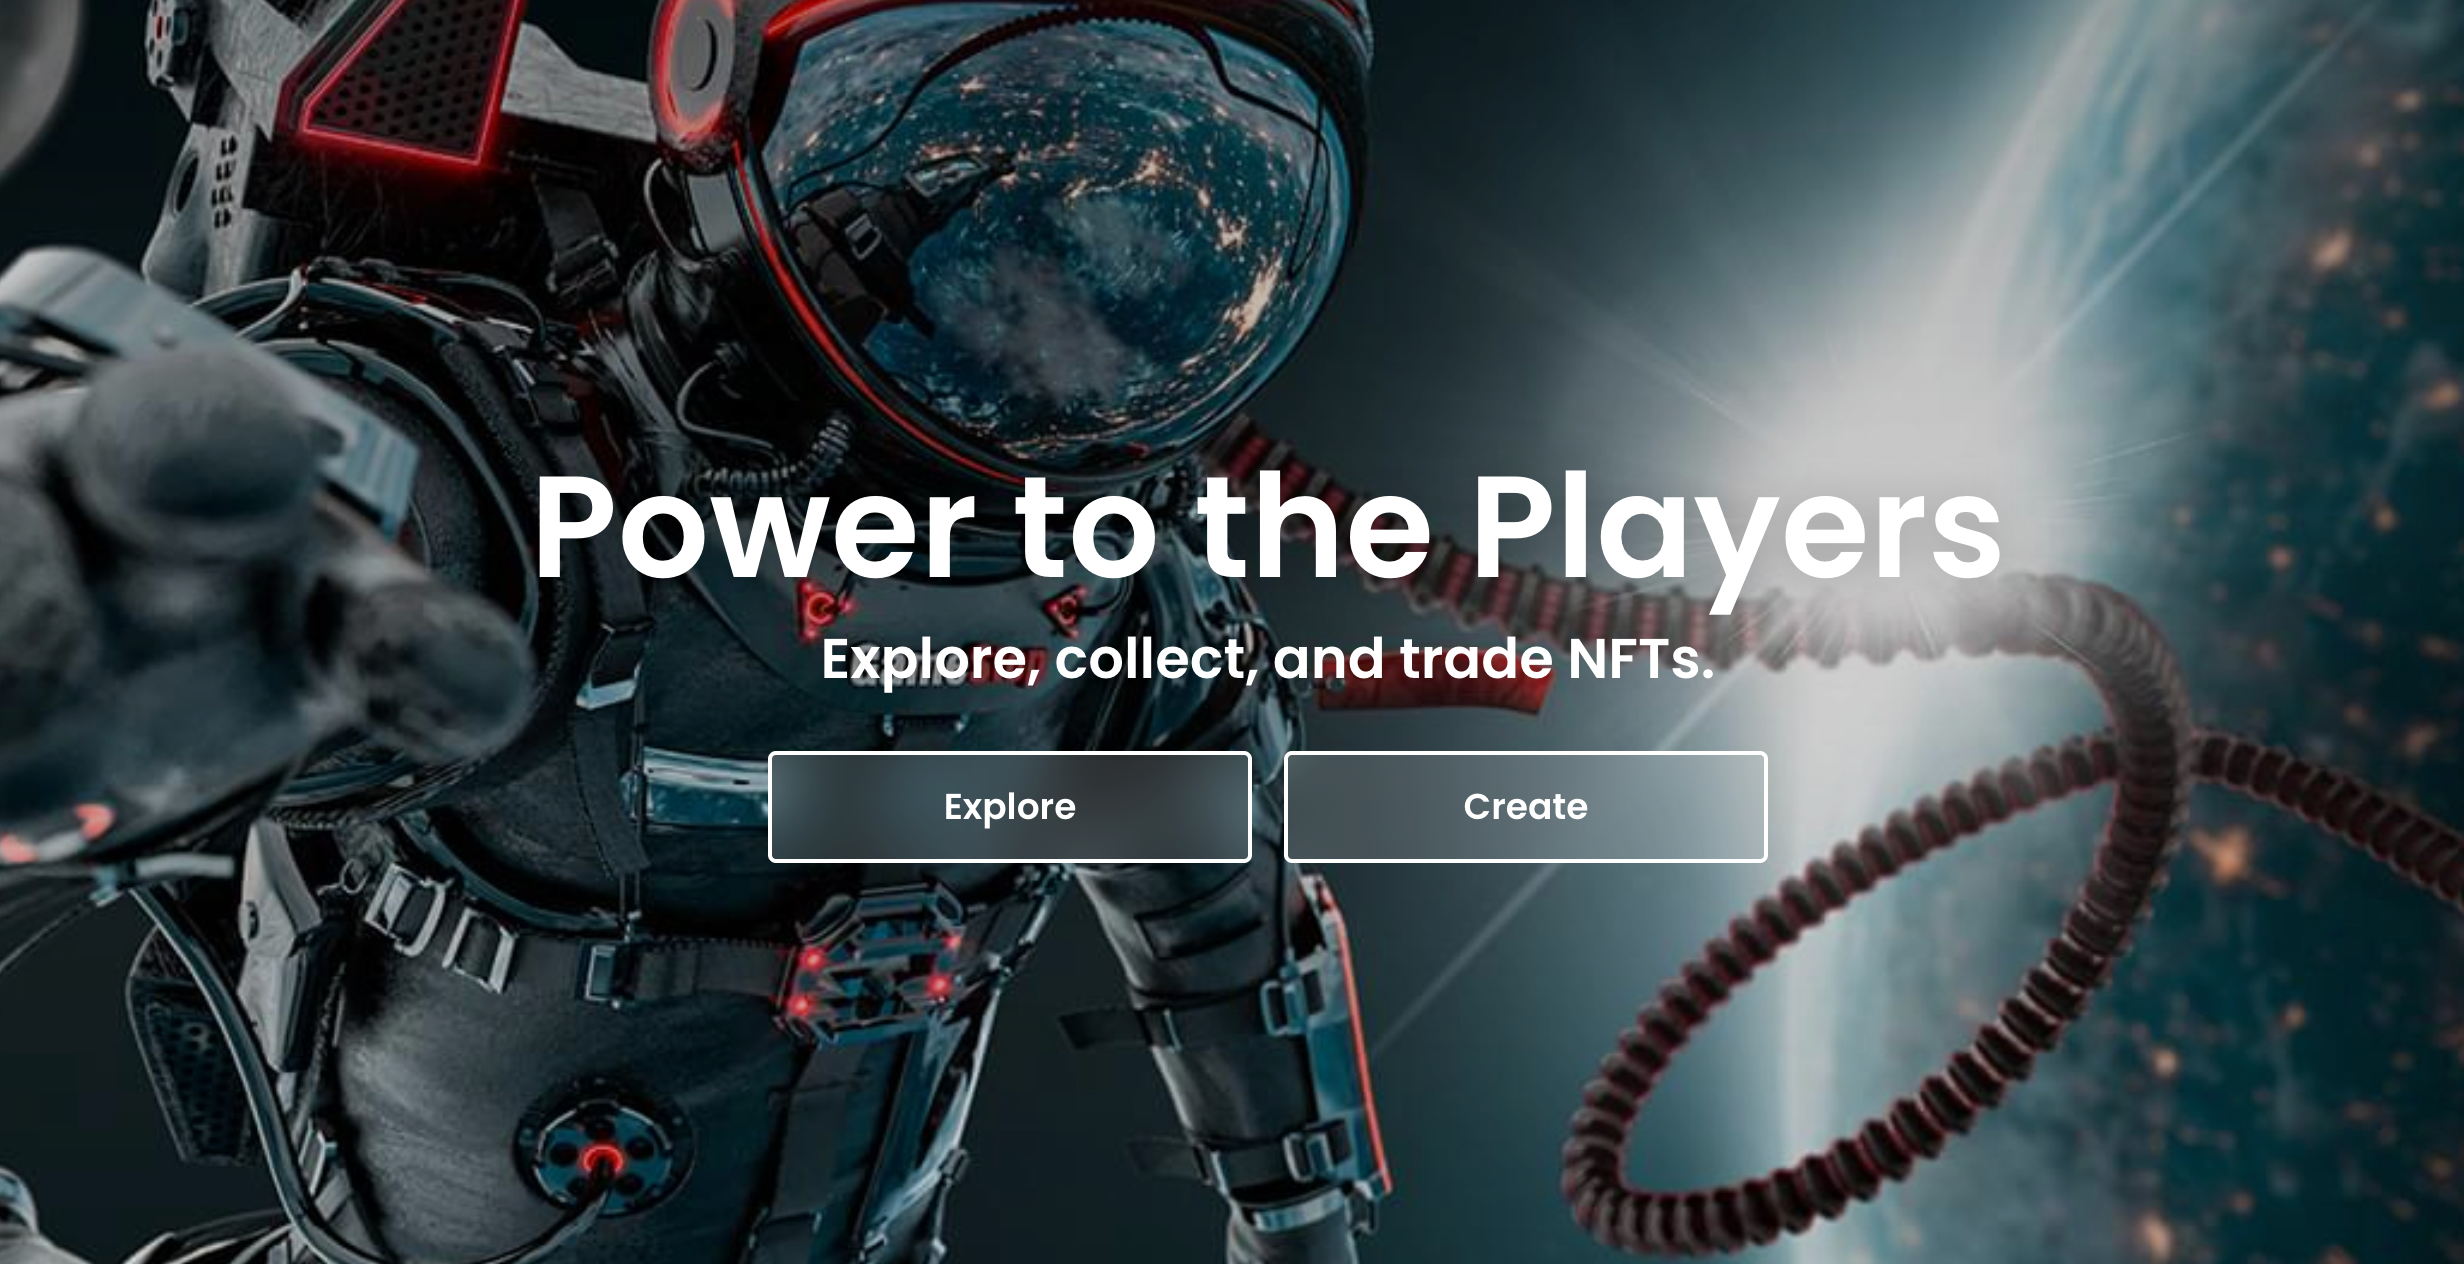 "Power to the Players", states Gamestop's NFT storefront